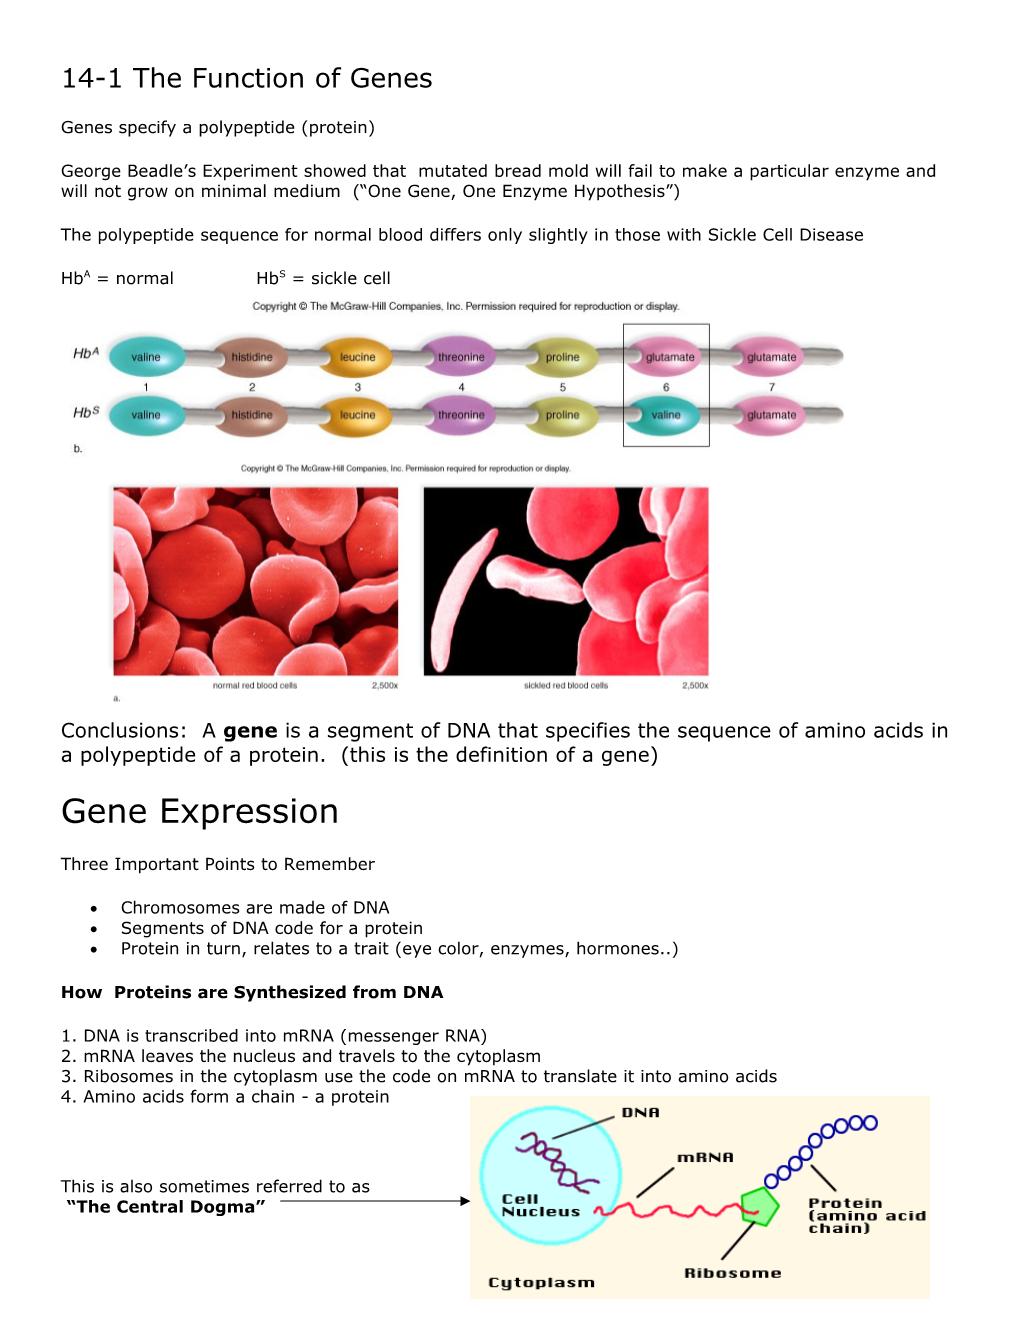 Genes Specify a Polypeptide (Protein)